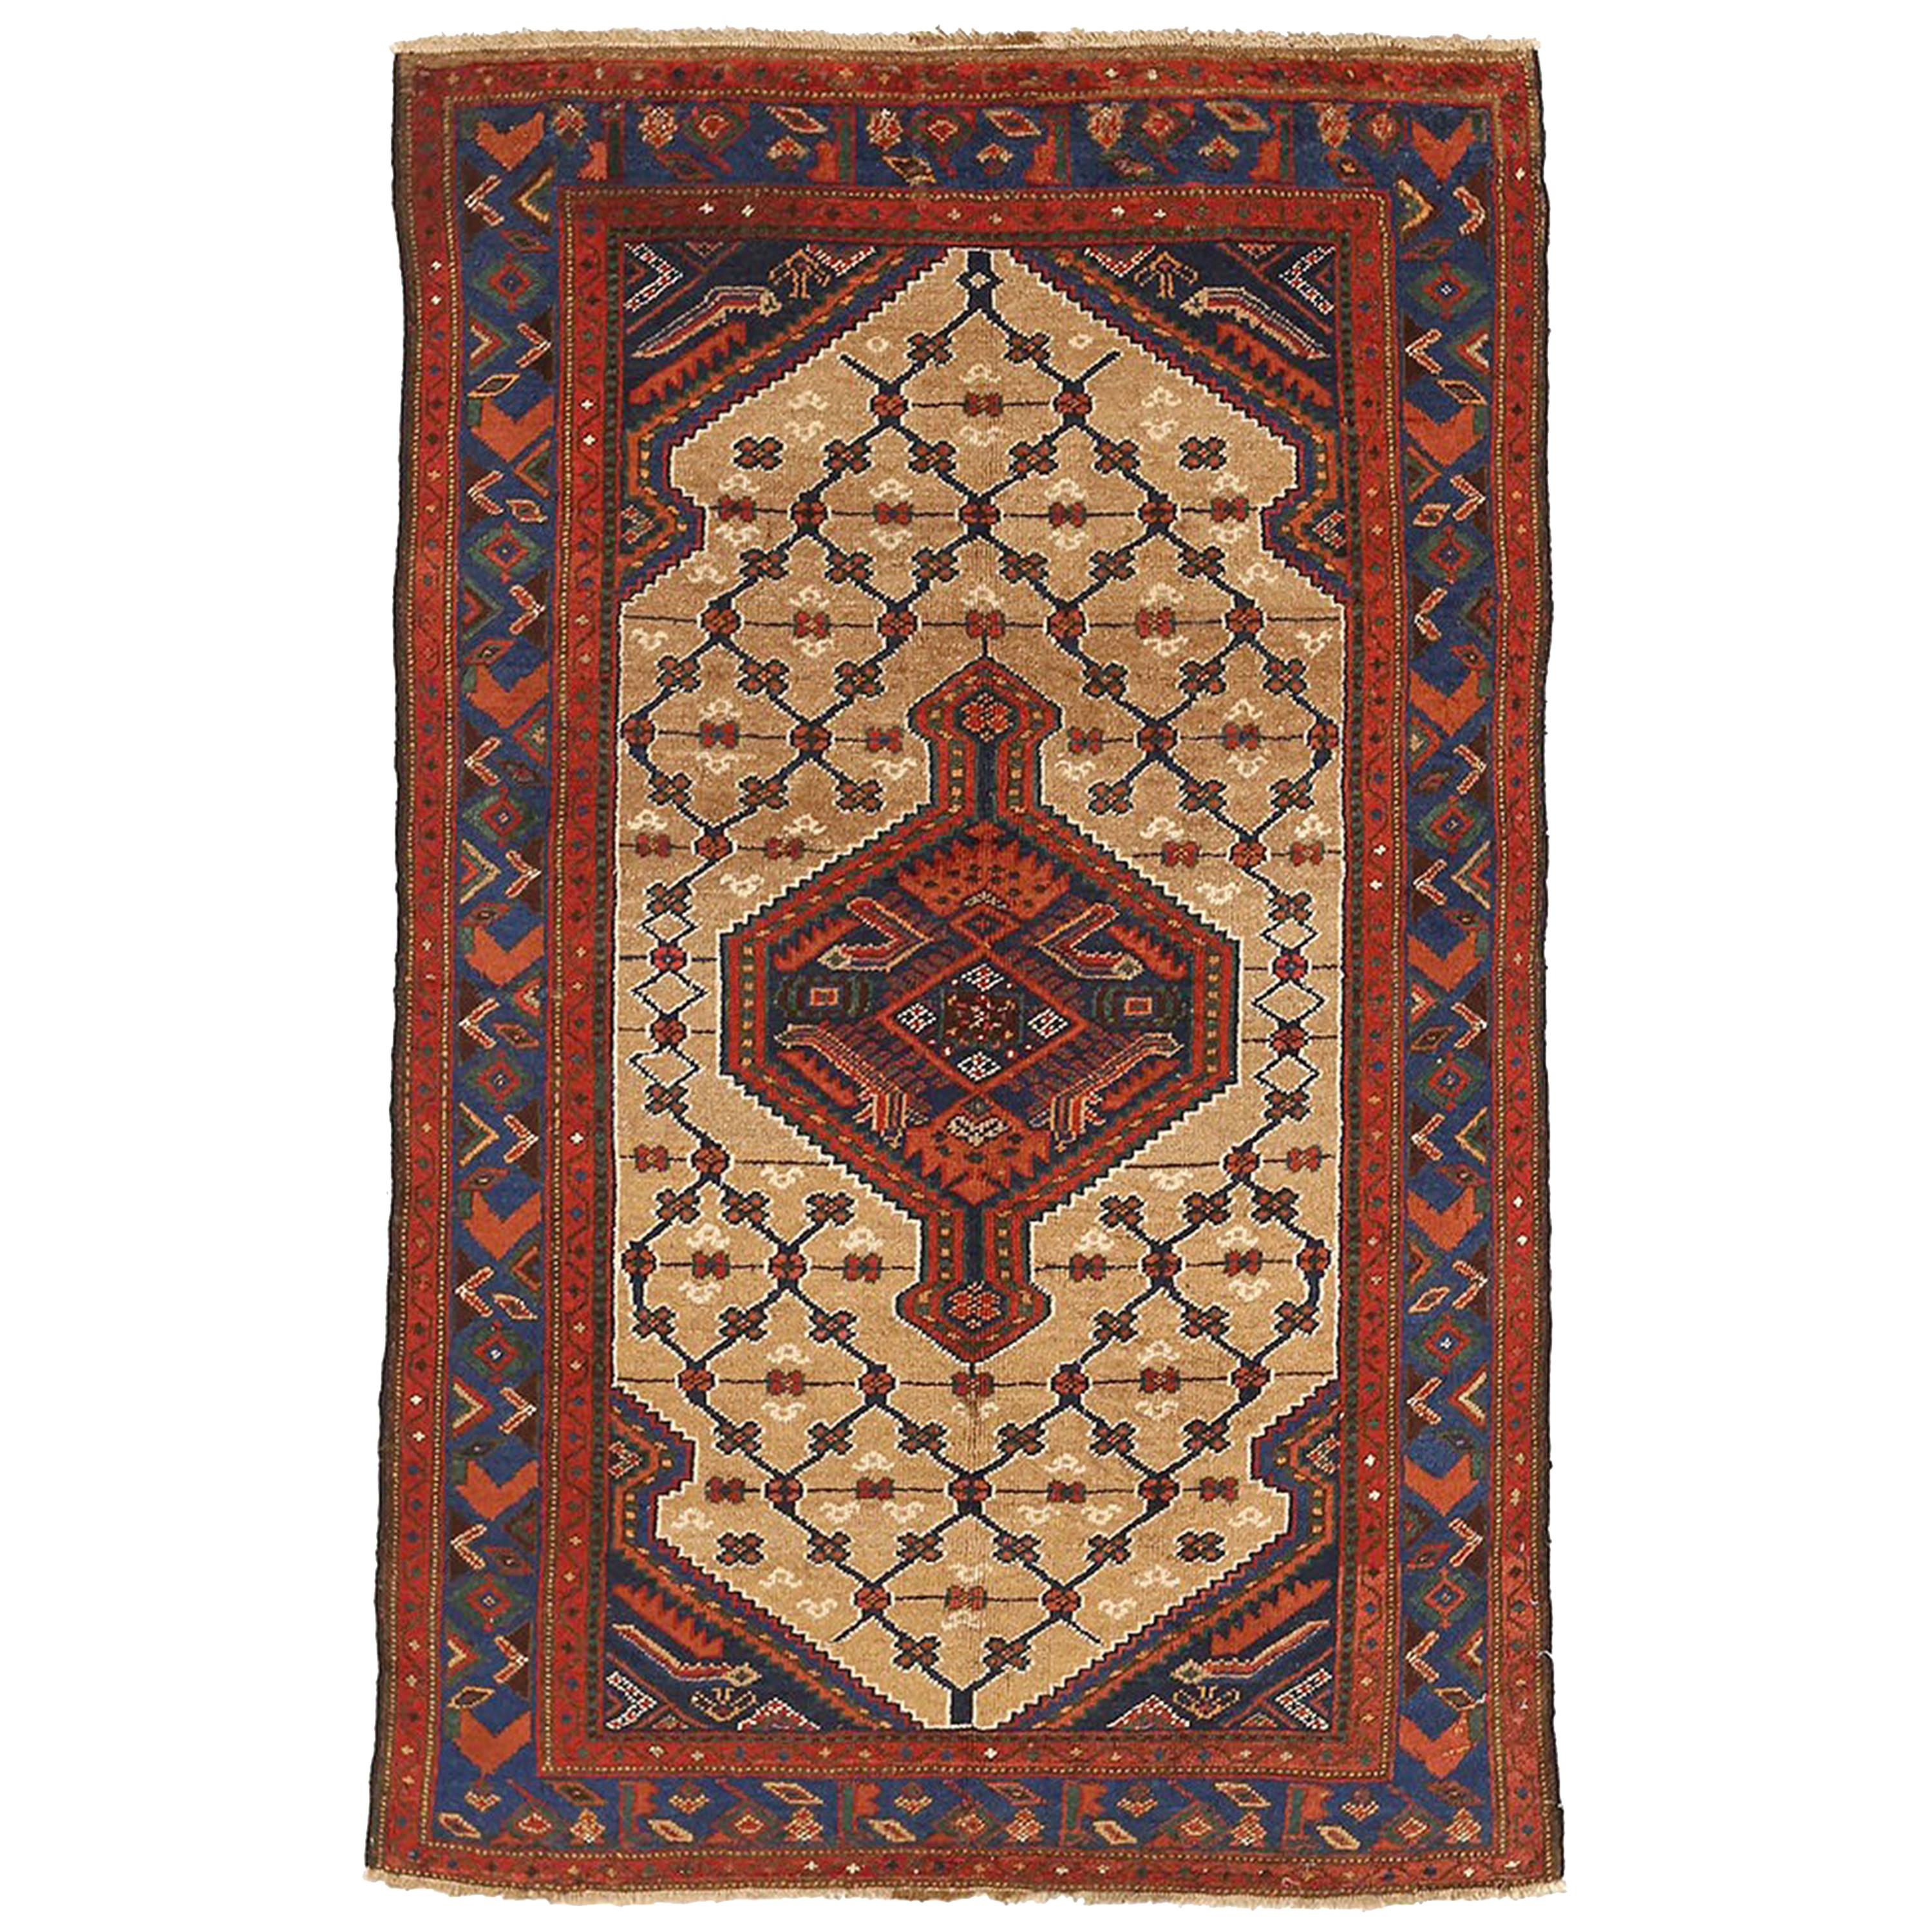 Antique Persian Hamadan Rug with Navy and Red Central Medallion on Beige Field